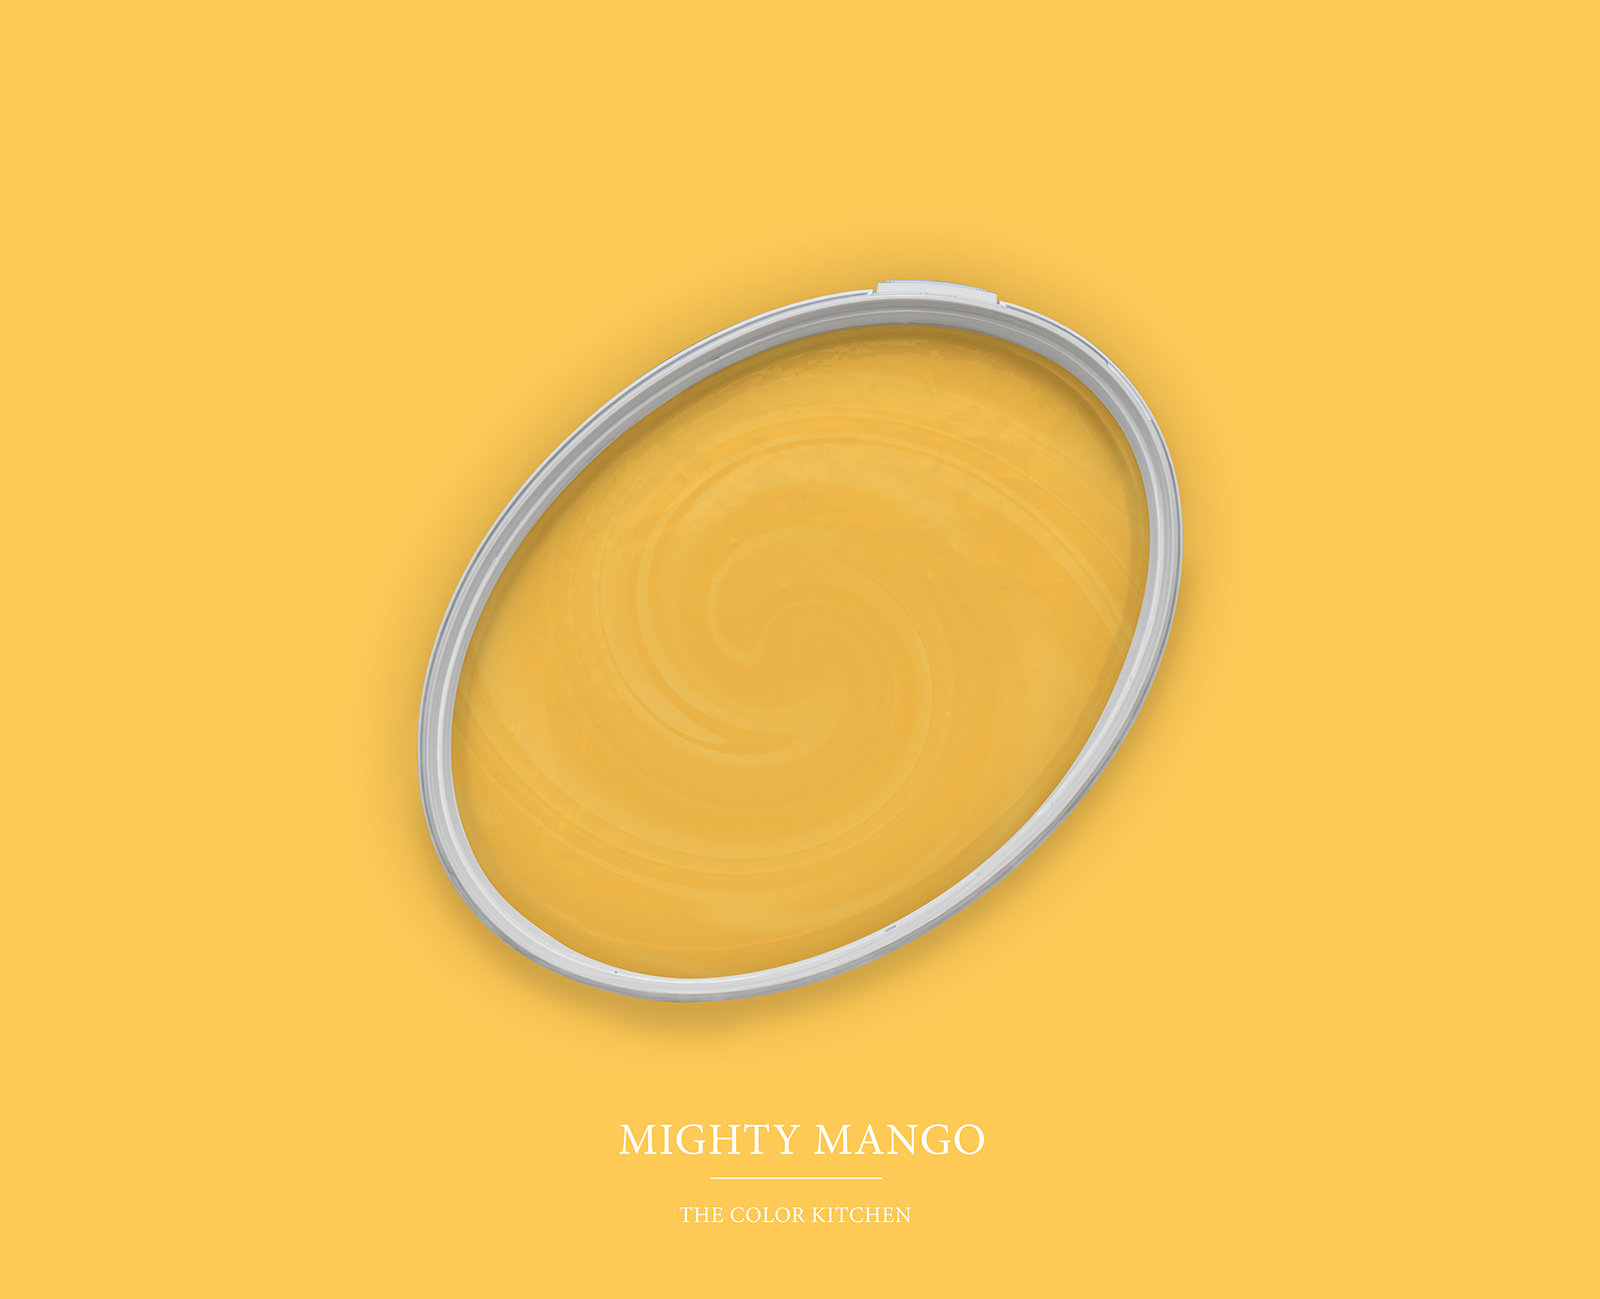         Wall Paint TCK5003 »Mighty Mango« in bright yellow – 2.5 litre
    